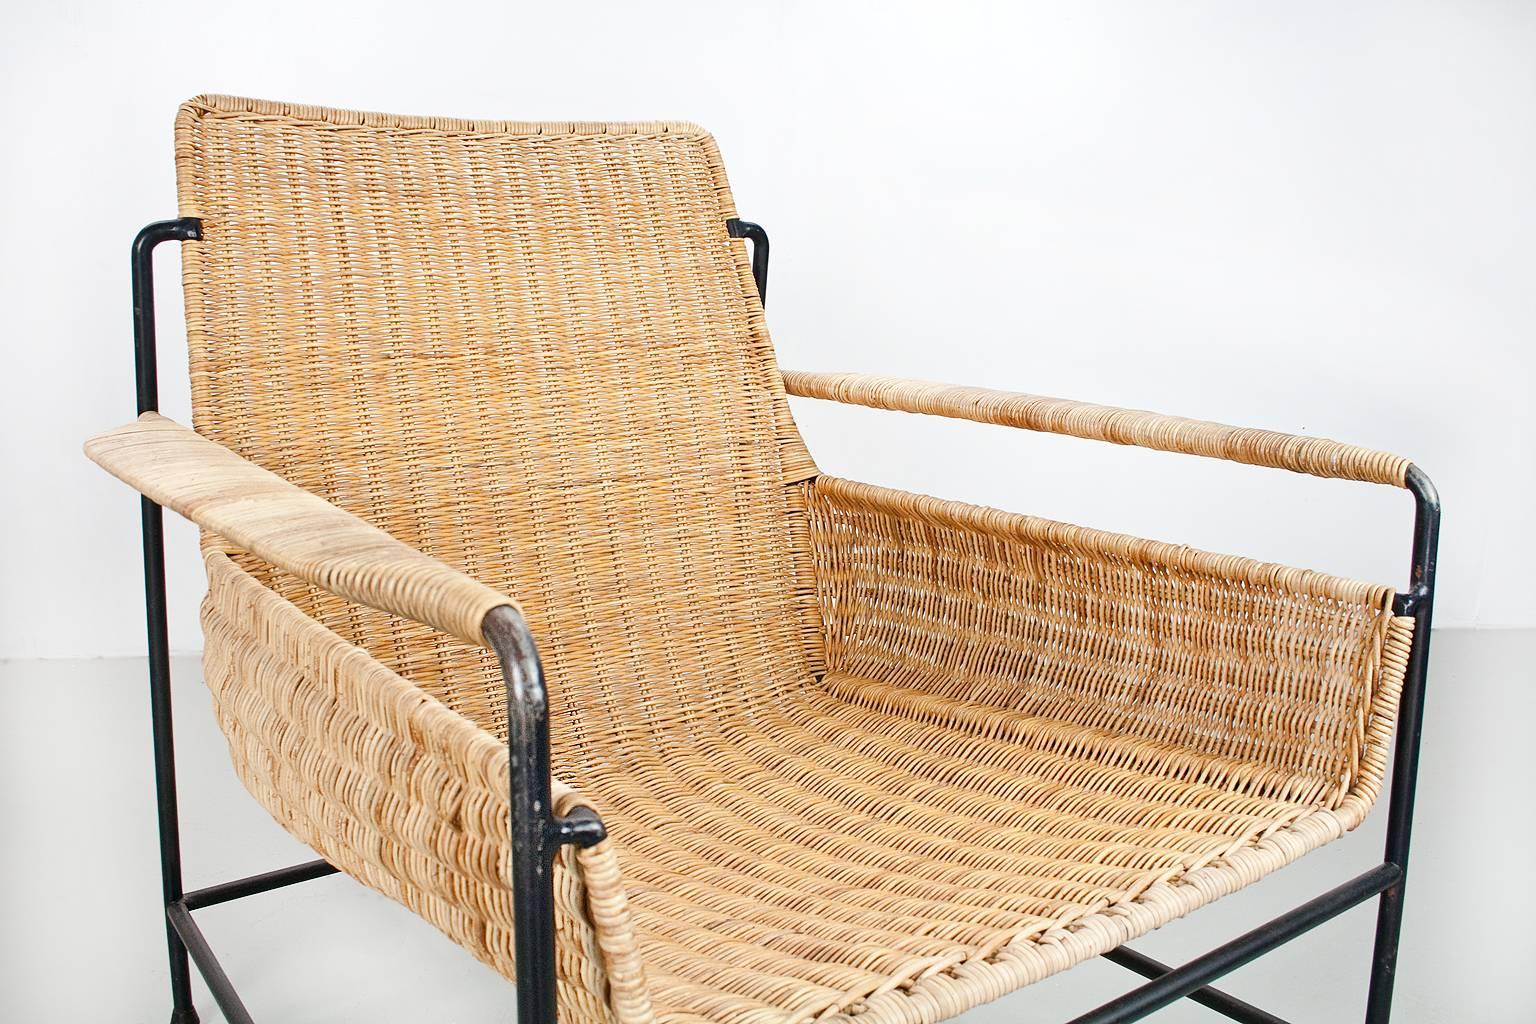 Lacquered Herta Maria Witzemann Set of Rattan Lounge Chair 1954 by Wilde & Spieth